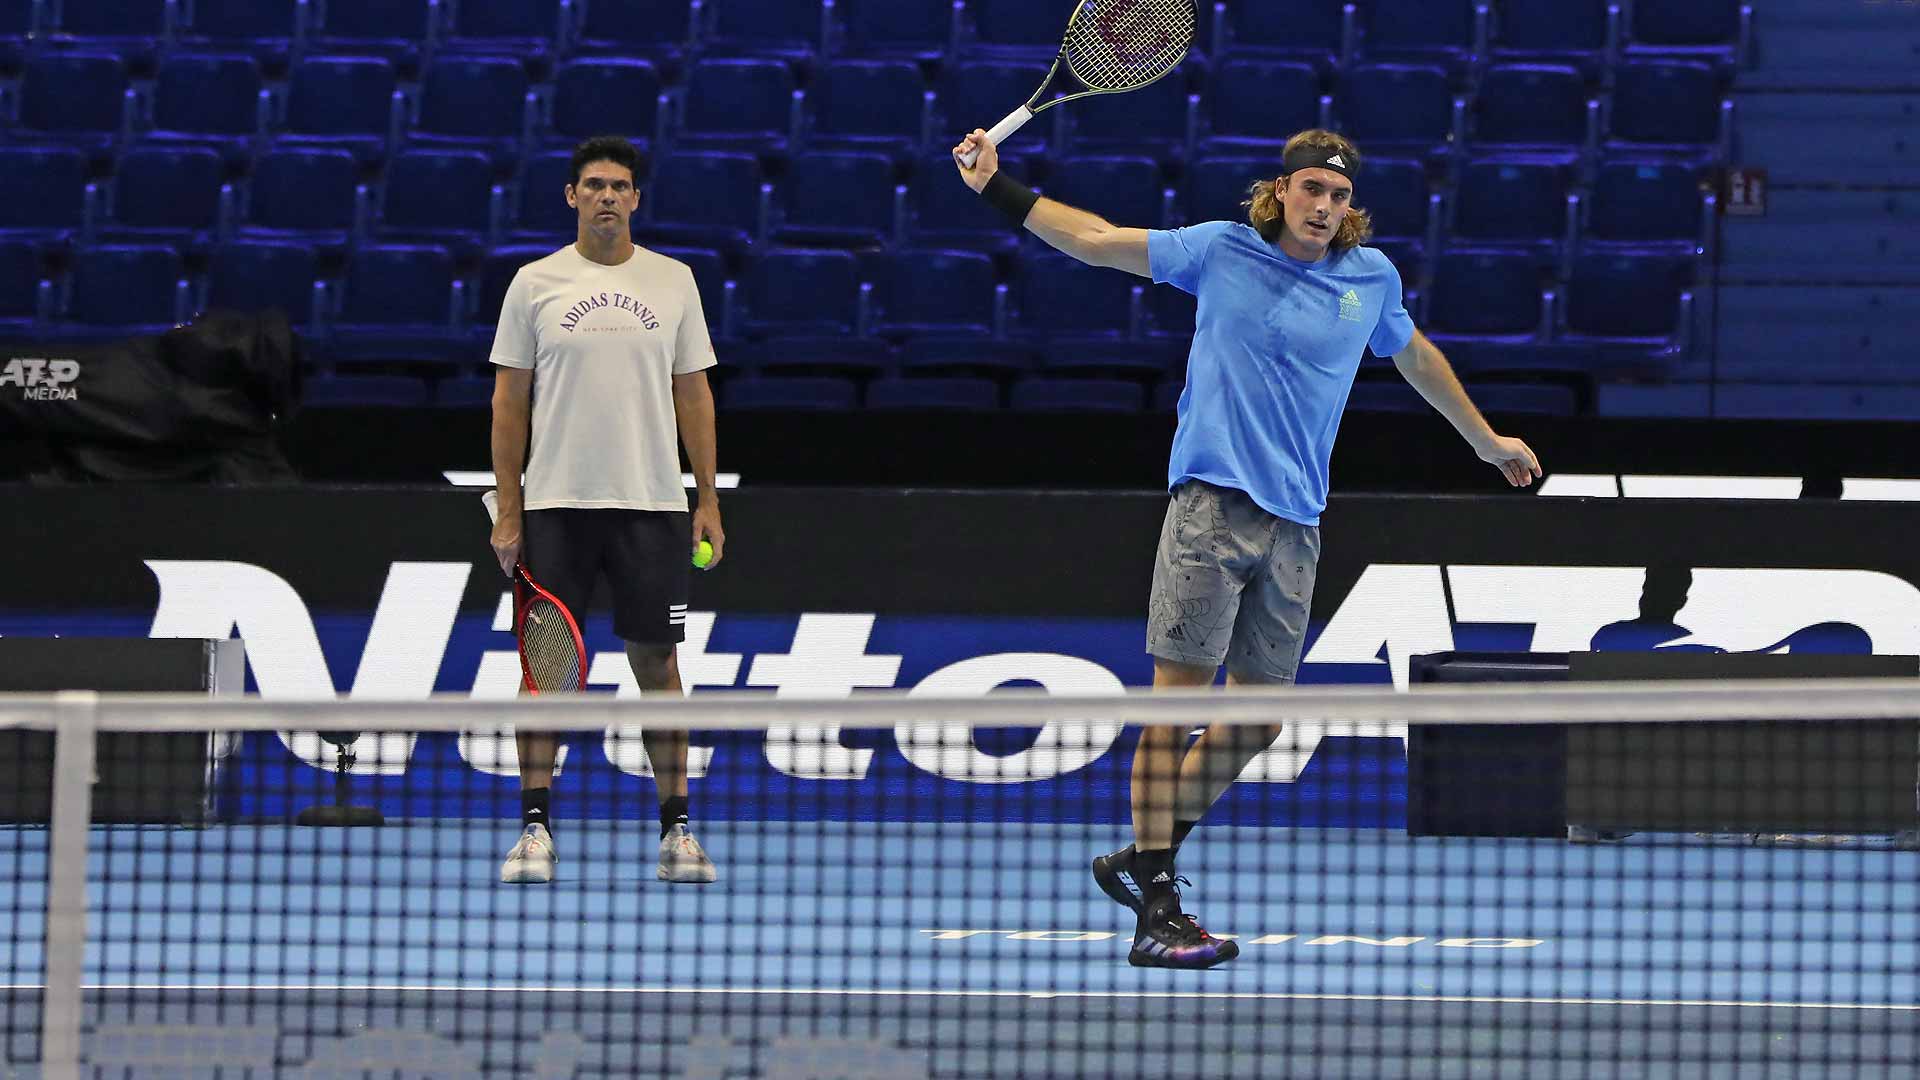 Mark Philippoussis watches Stefanos Tsitsipas train at the 2022 Nitto ATP Finals in Turin.